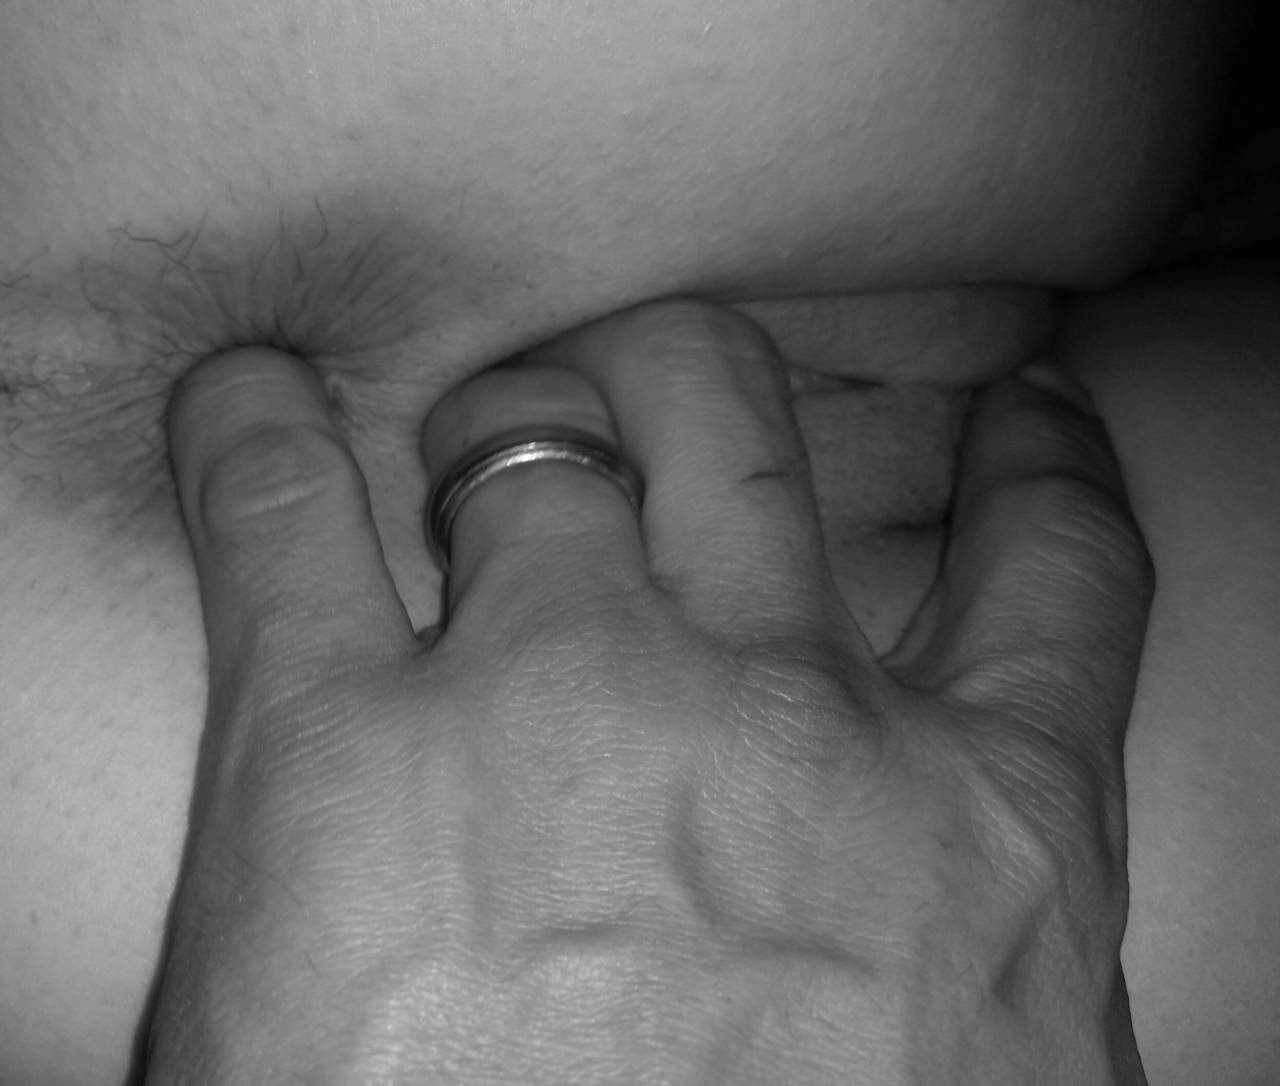 for those who requested moretwo holes stuffed #nsfw #GWCouples